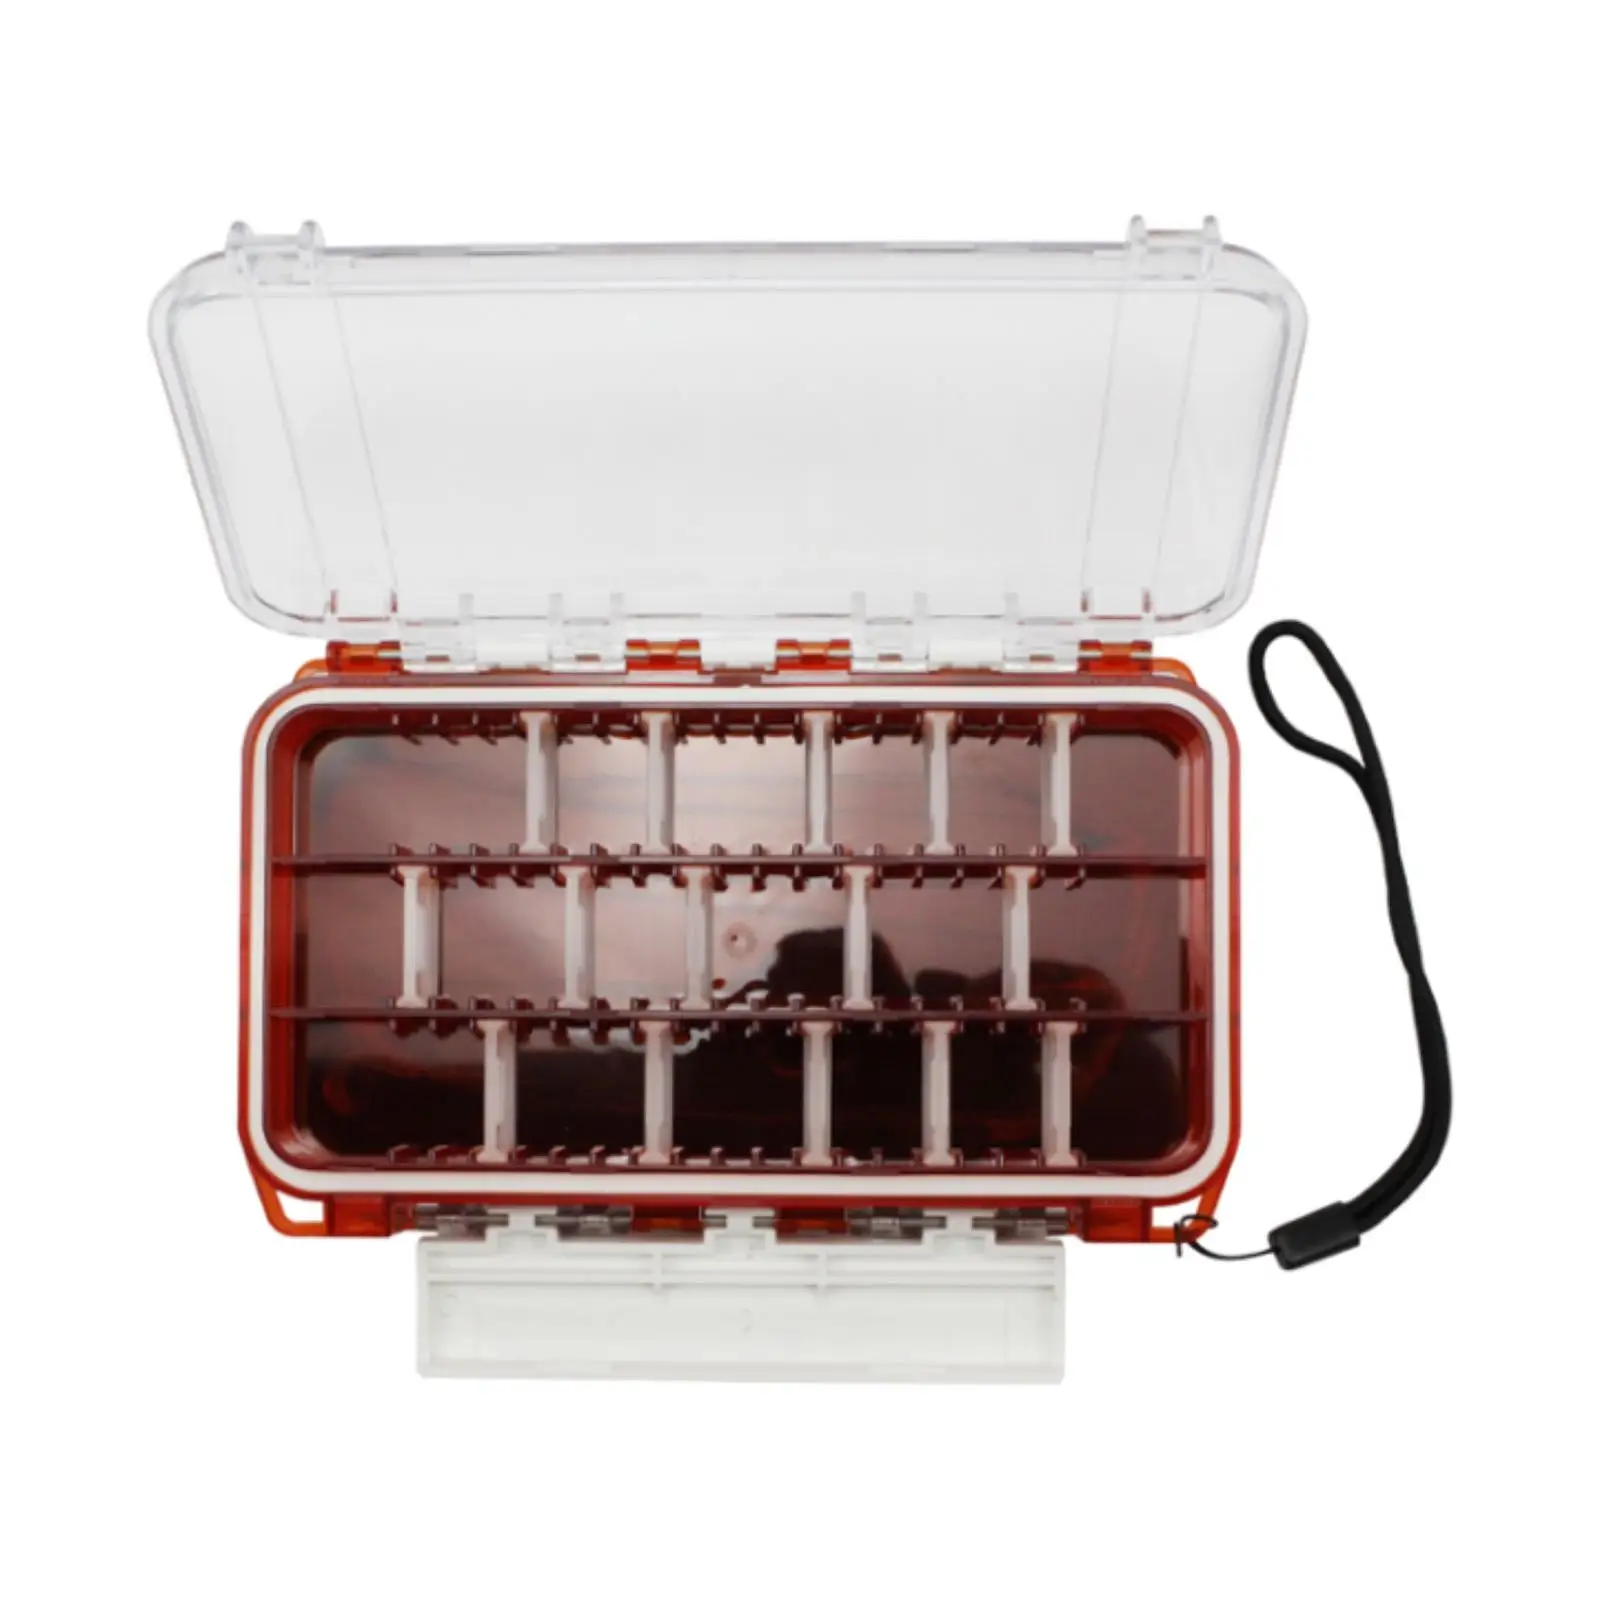 Fishing Tackle Box Organizer Case Container Case Organizer Storage Container